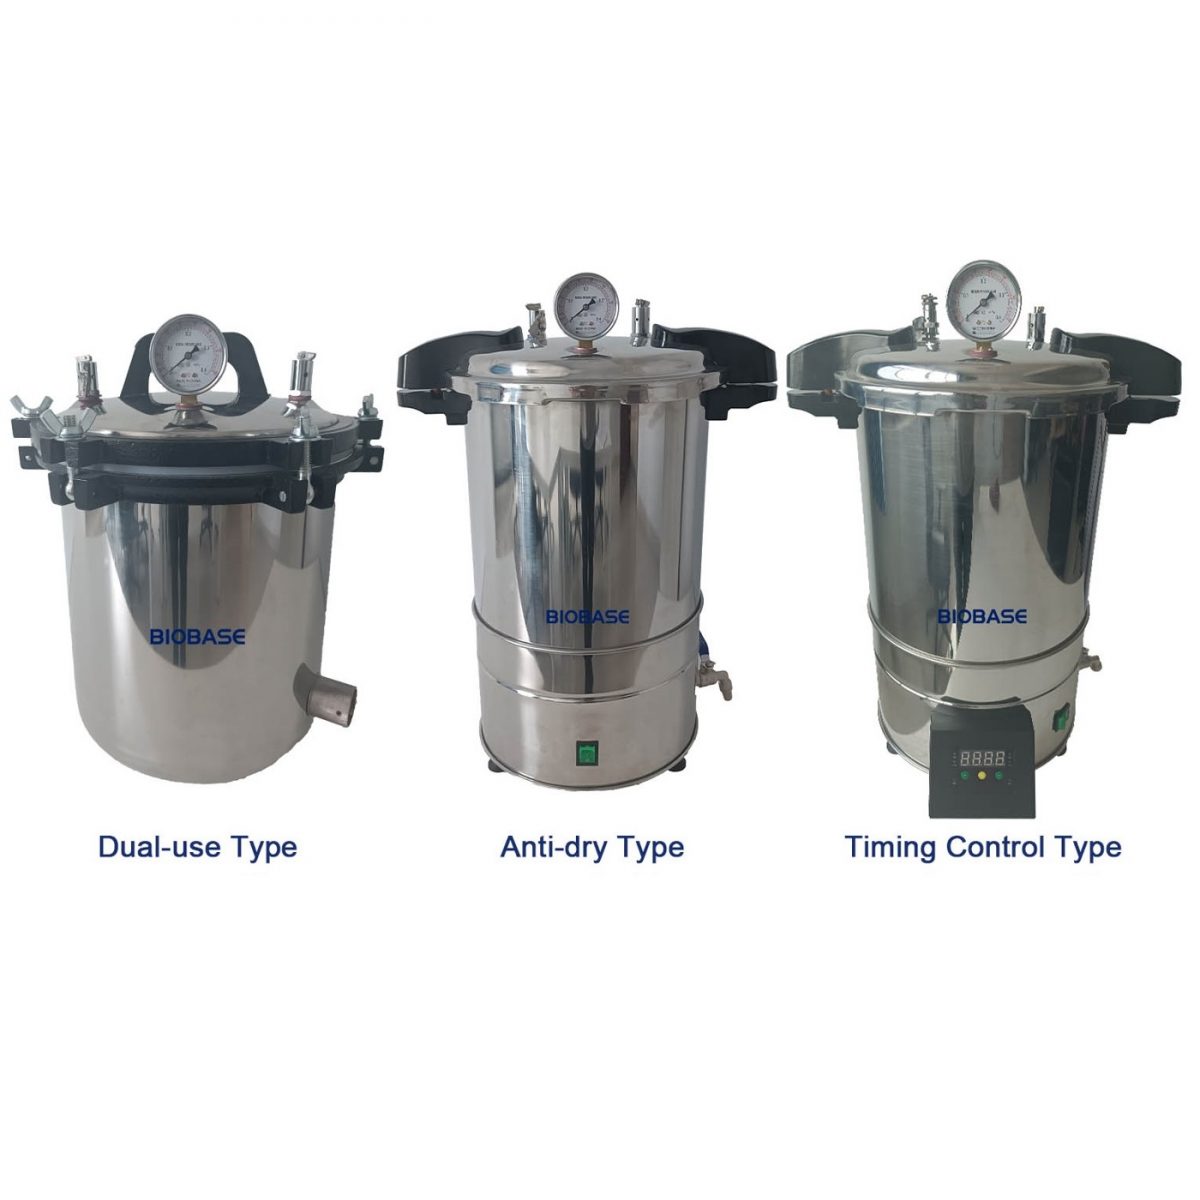 Portable Autoclave Sterilizer from Knowledge Research